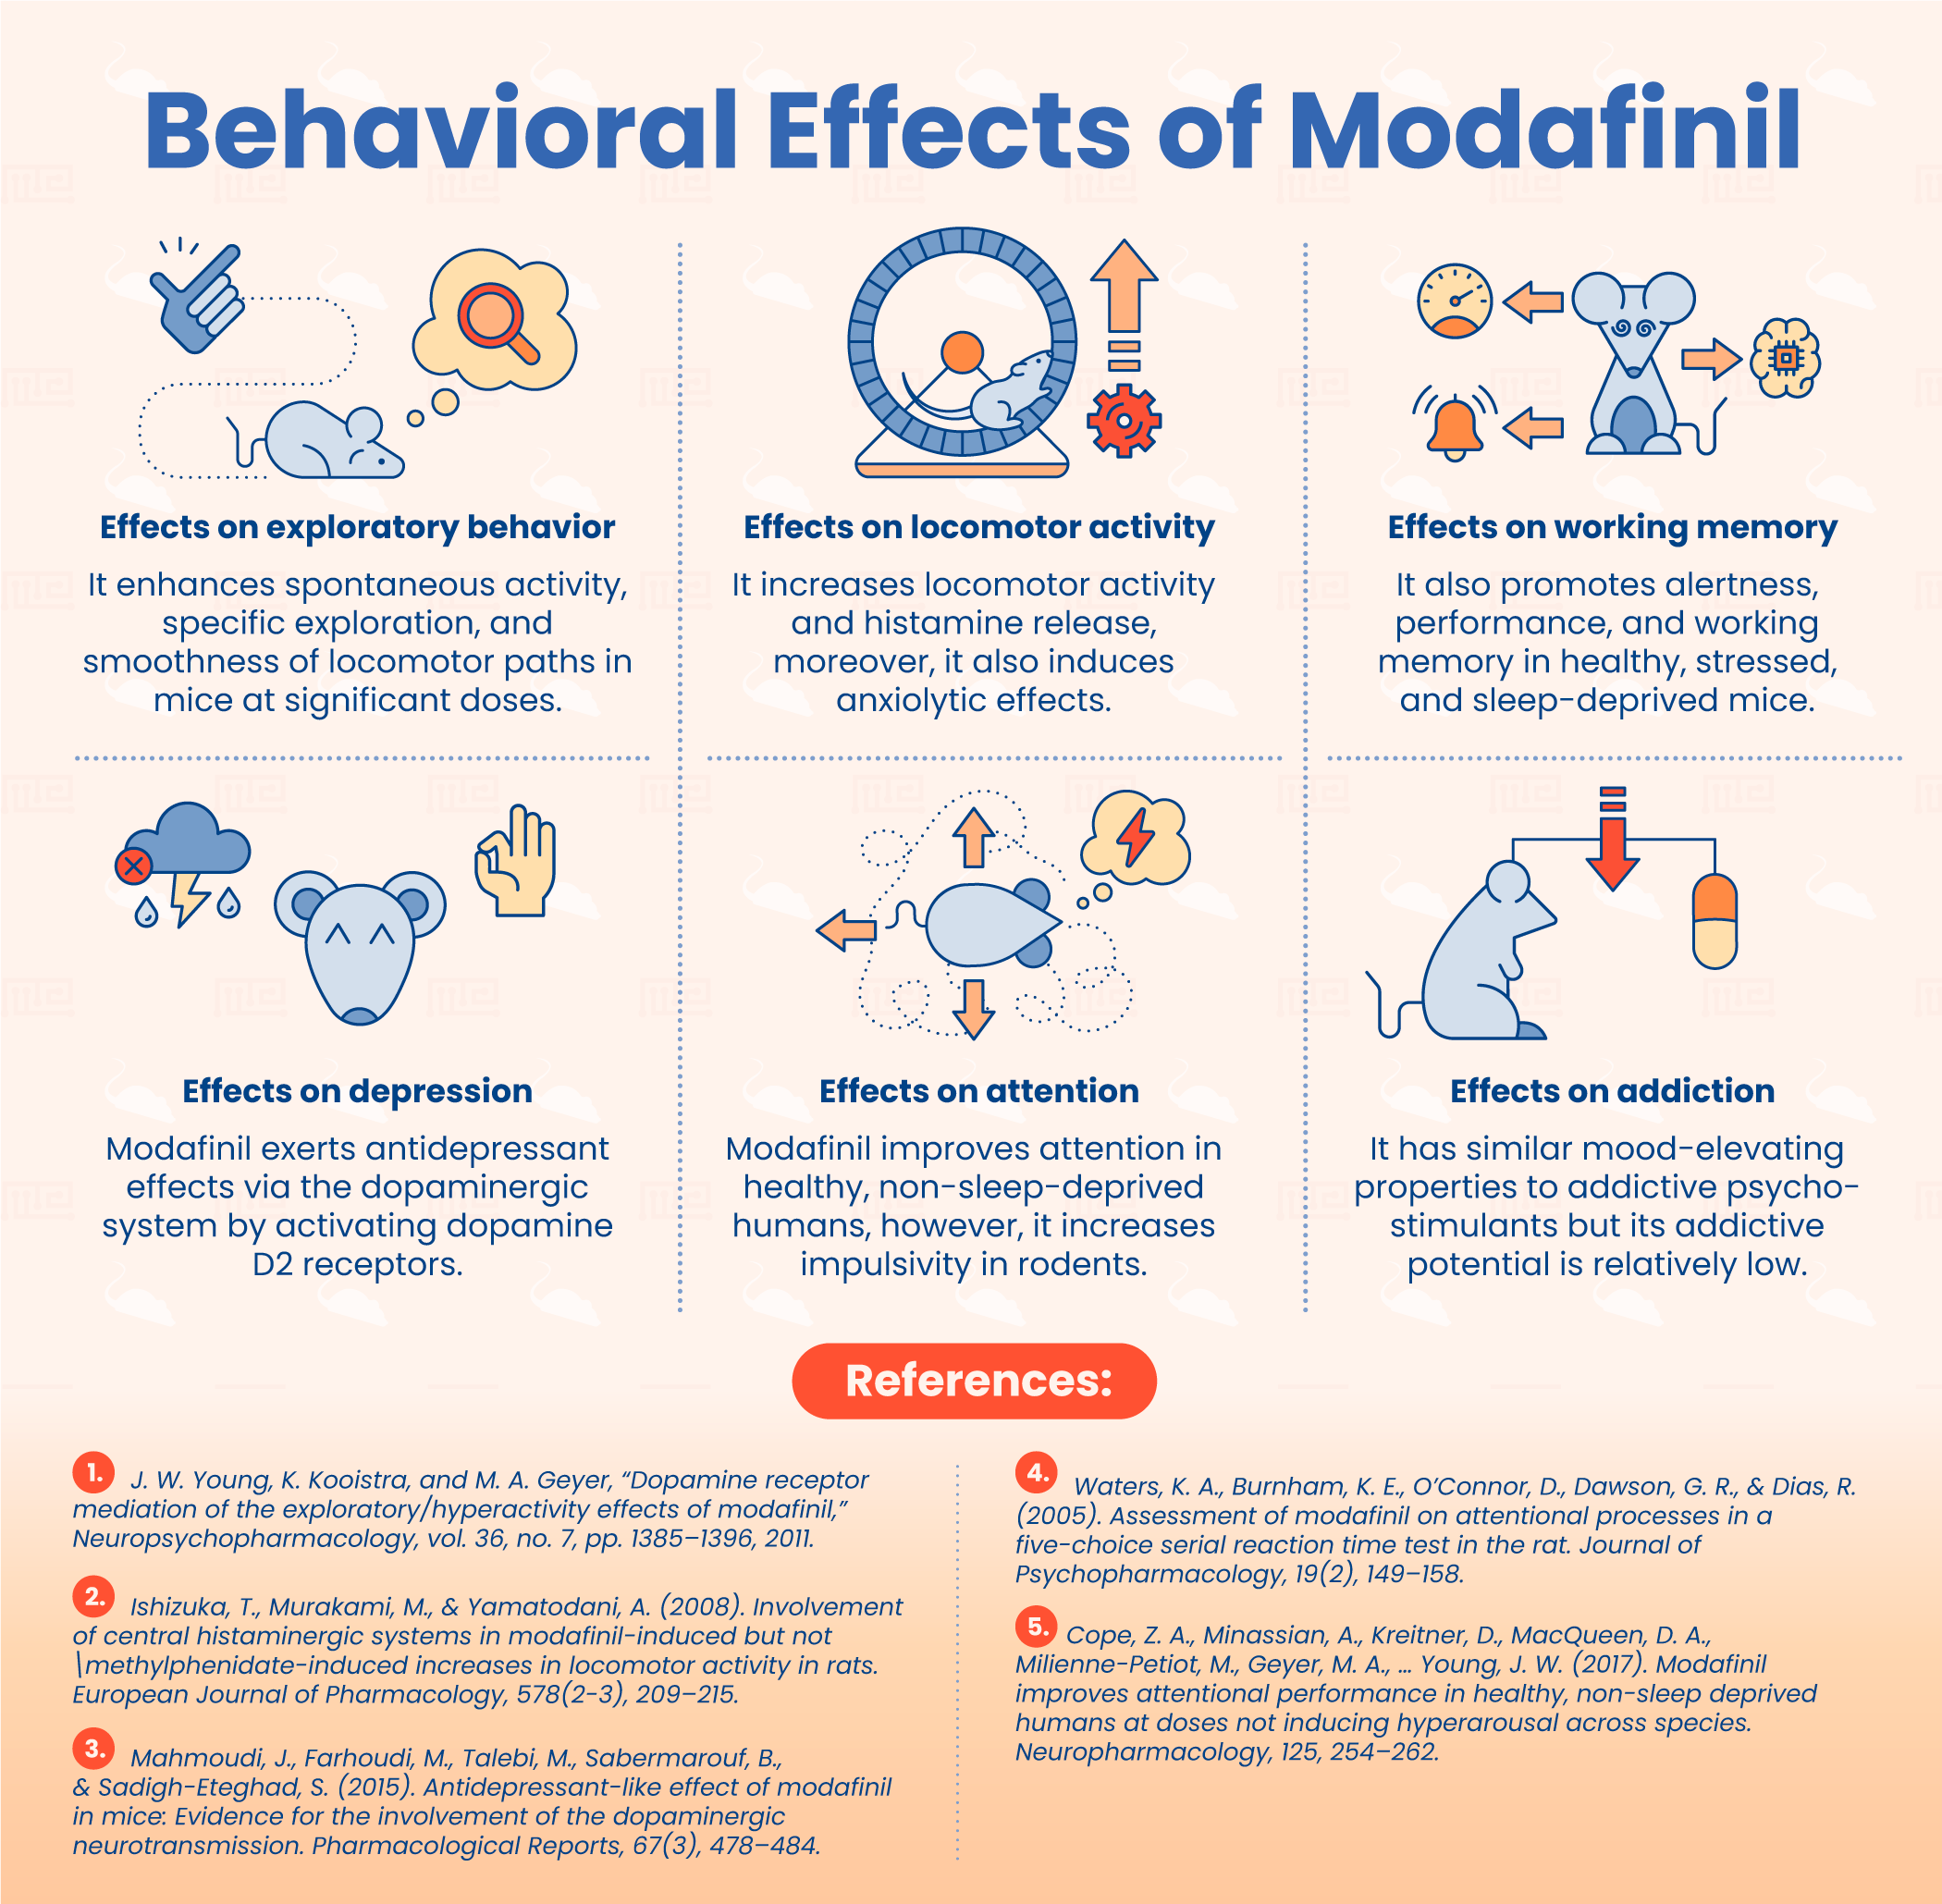 Modafinil Vs Adderall: Which To Use?